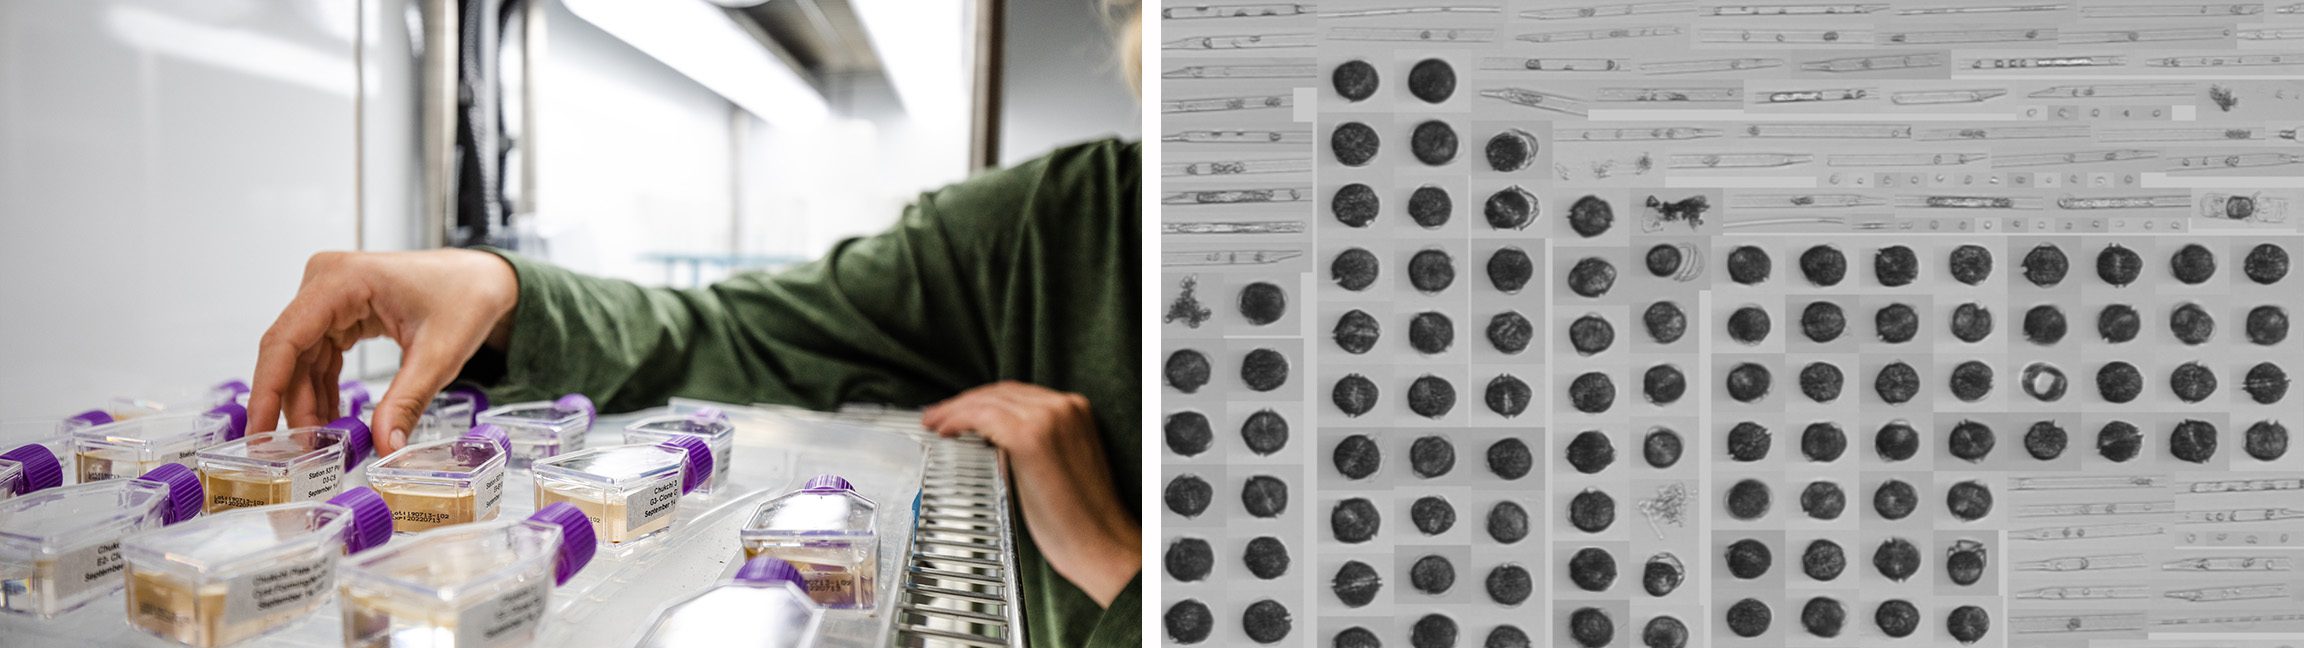 (Left) Evie Fachon arranges <em>Alexandrium</em> cultures in the incubator at WHOI's Anderson Lab. (Right) A dashboard image from the IFCB shows high concentrations of the <em>Alexandrium</em> (dark round cells) found in a Bering Strait water sample. (In order of appearance, photos are courtesy of Daniel Hentz and Evie Fachon, © Woods Hole Oceanographic Institution)